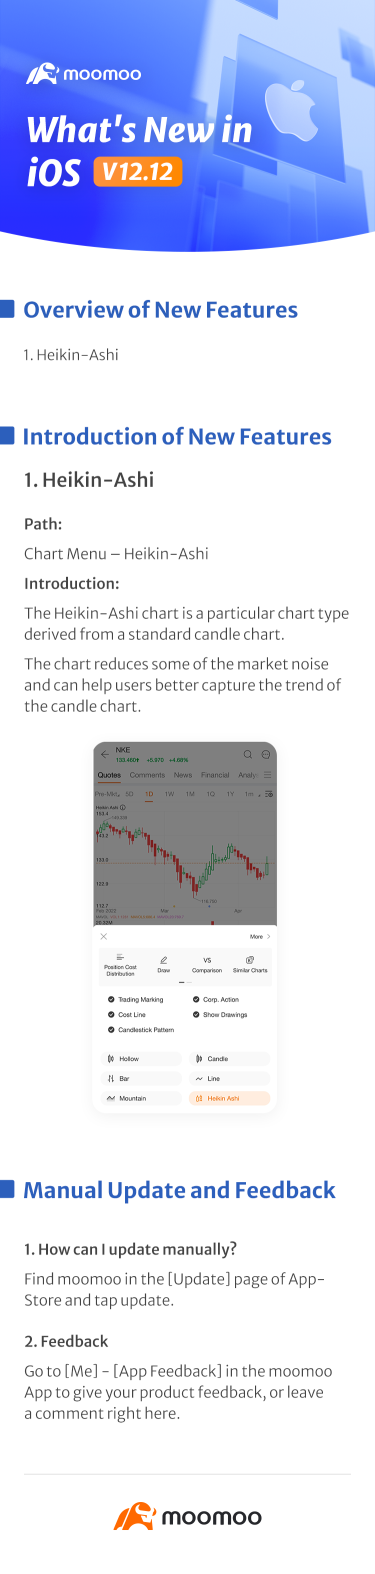 What's New: Heikin-Ashi Chart Available in iOS v12.12